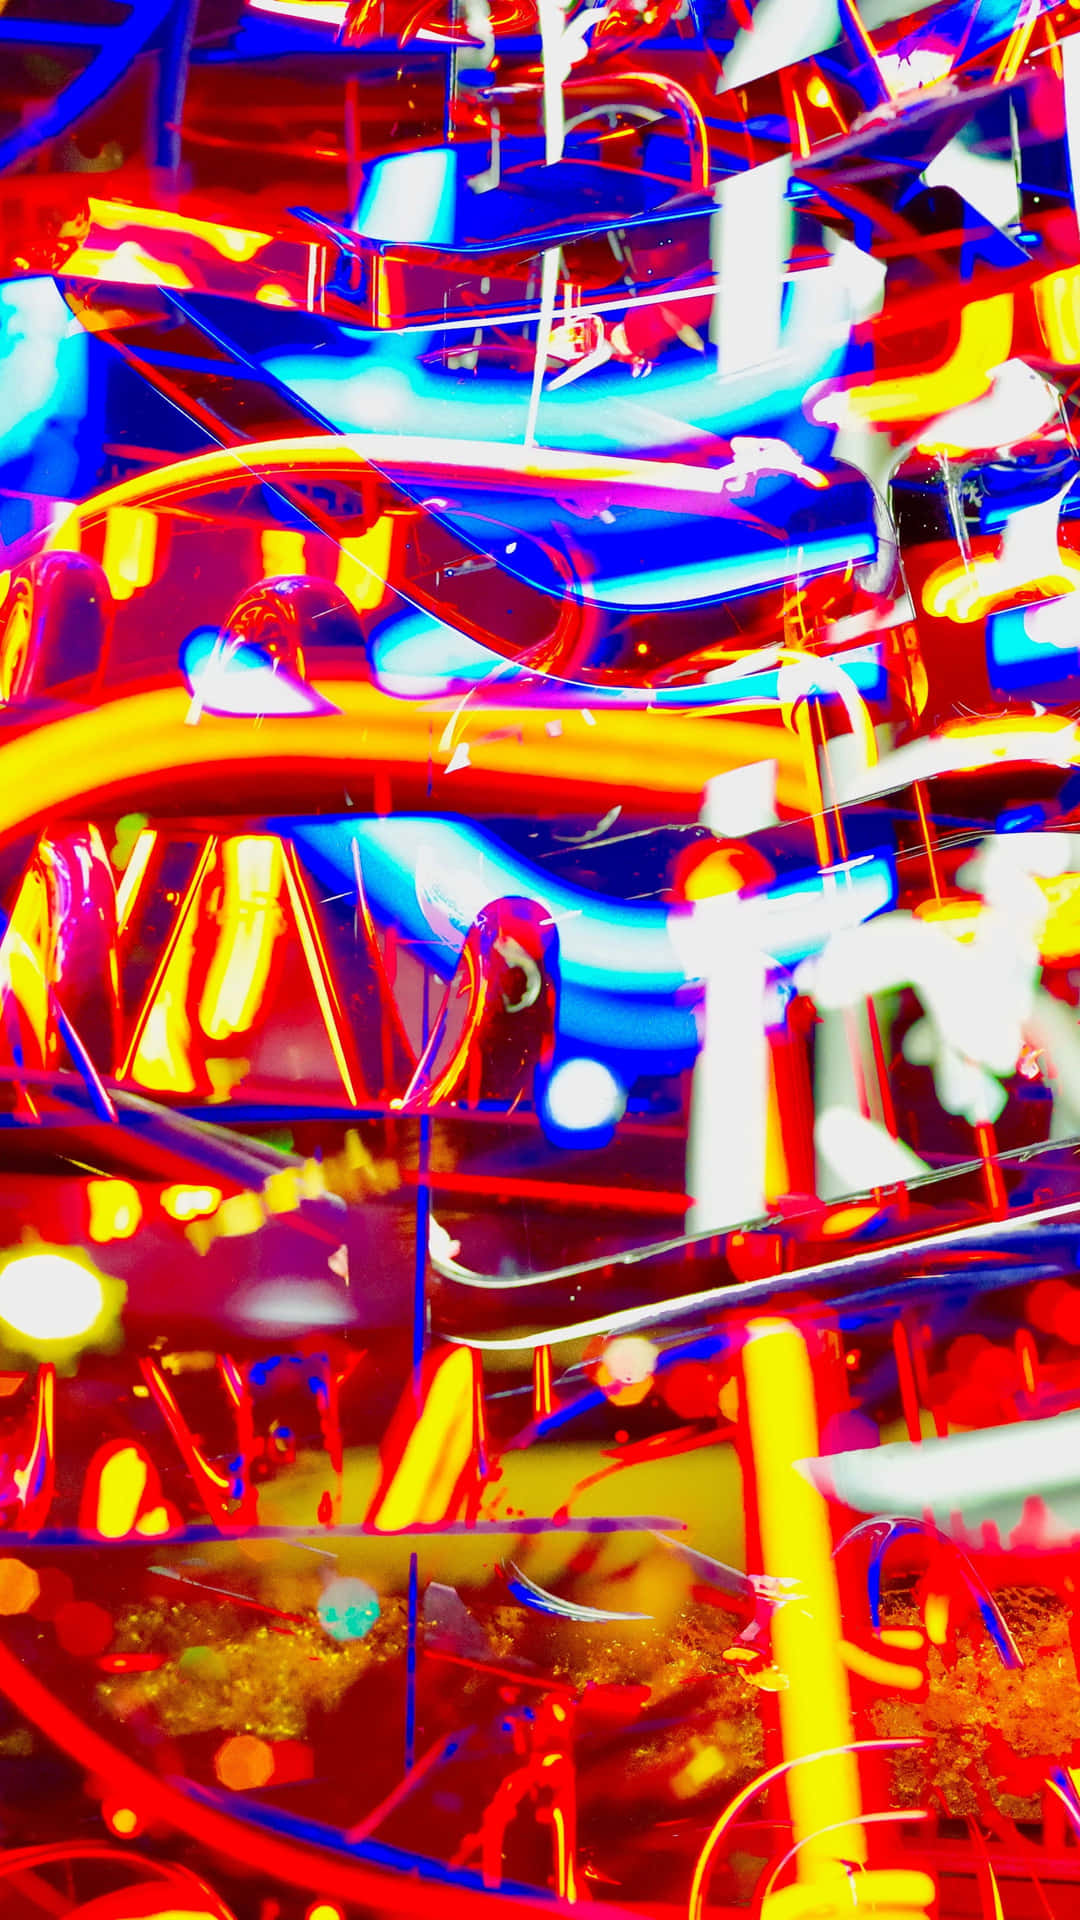 A Blurry Image Of A Neon Sign